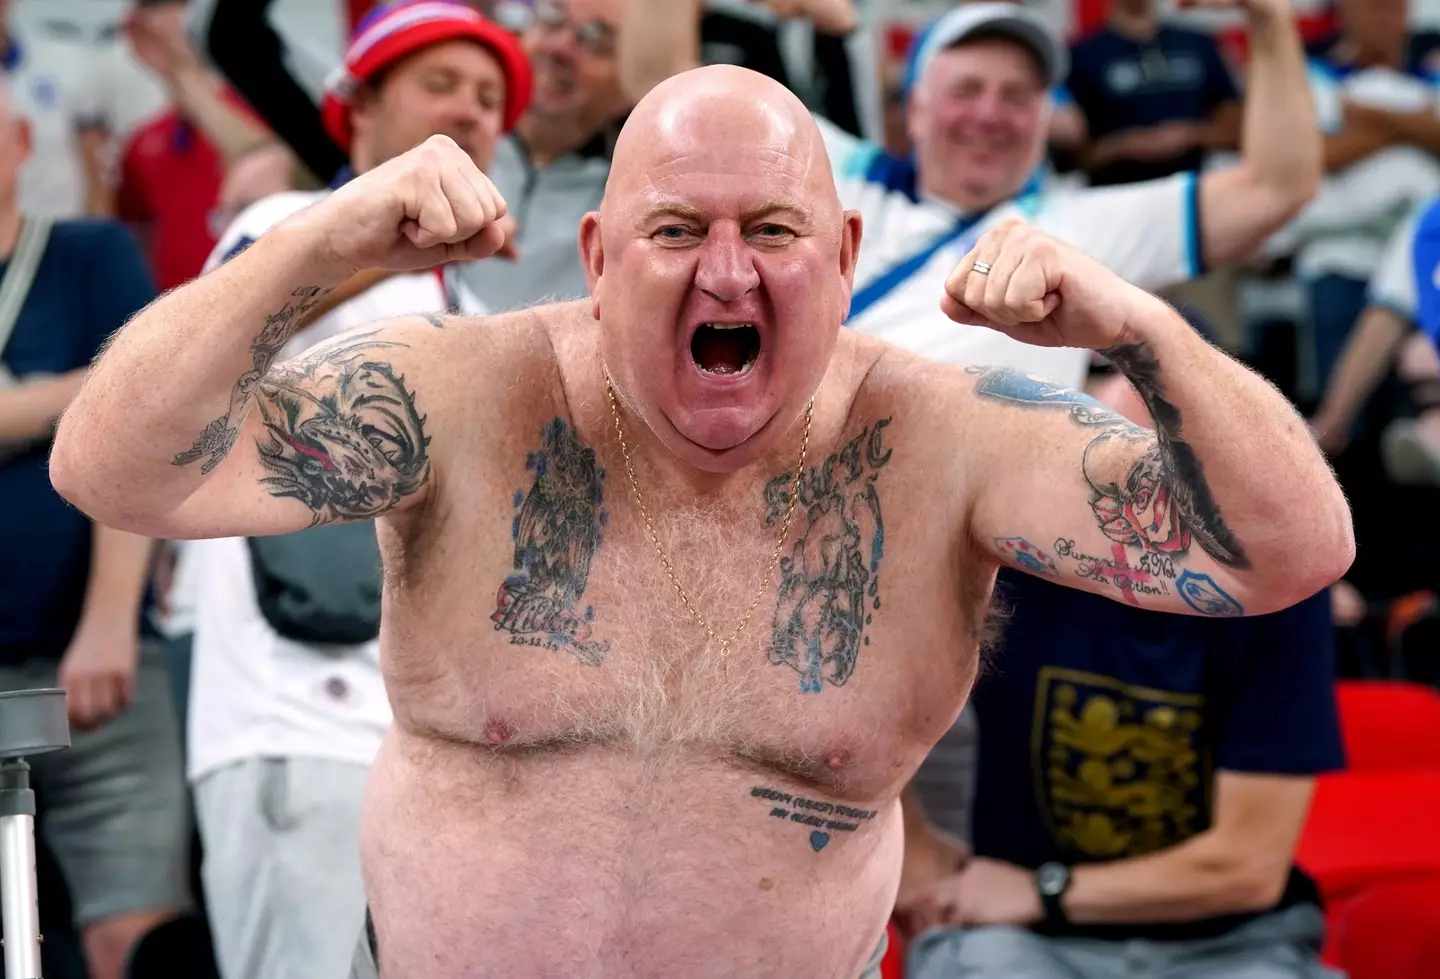 Paul whipped off his top during England's World Cup match with Wales this evening.